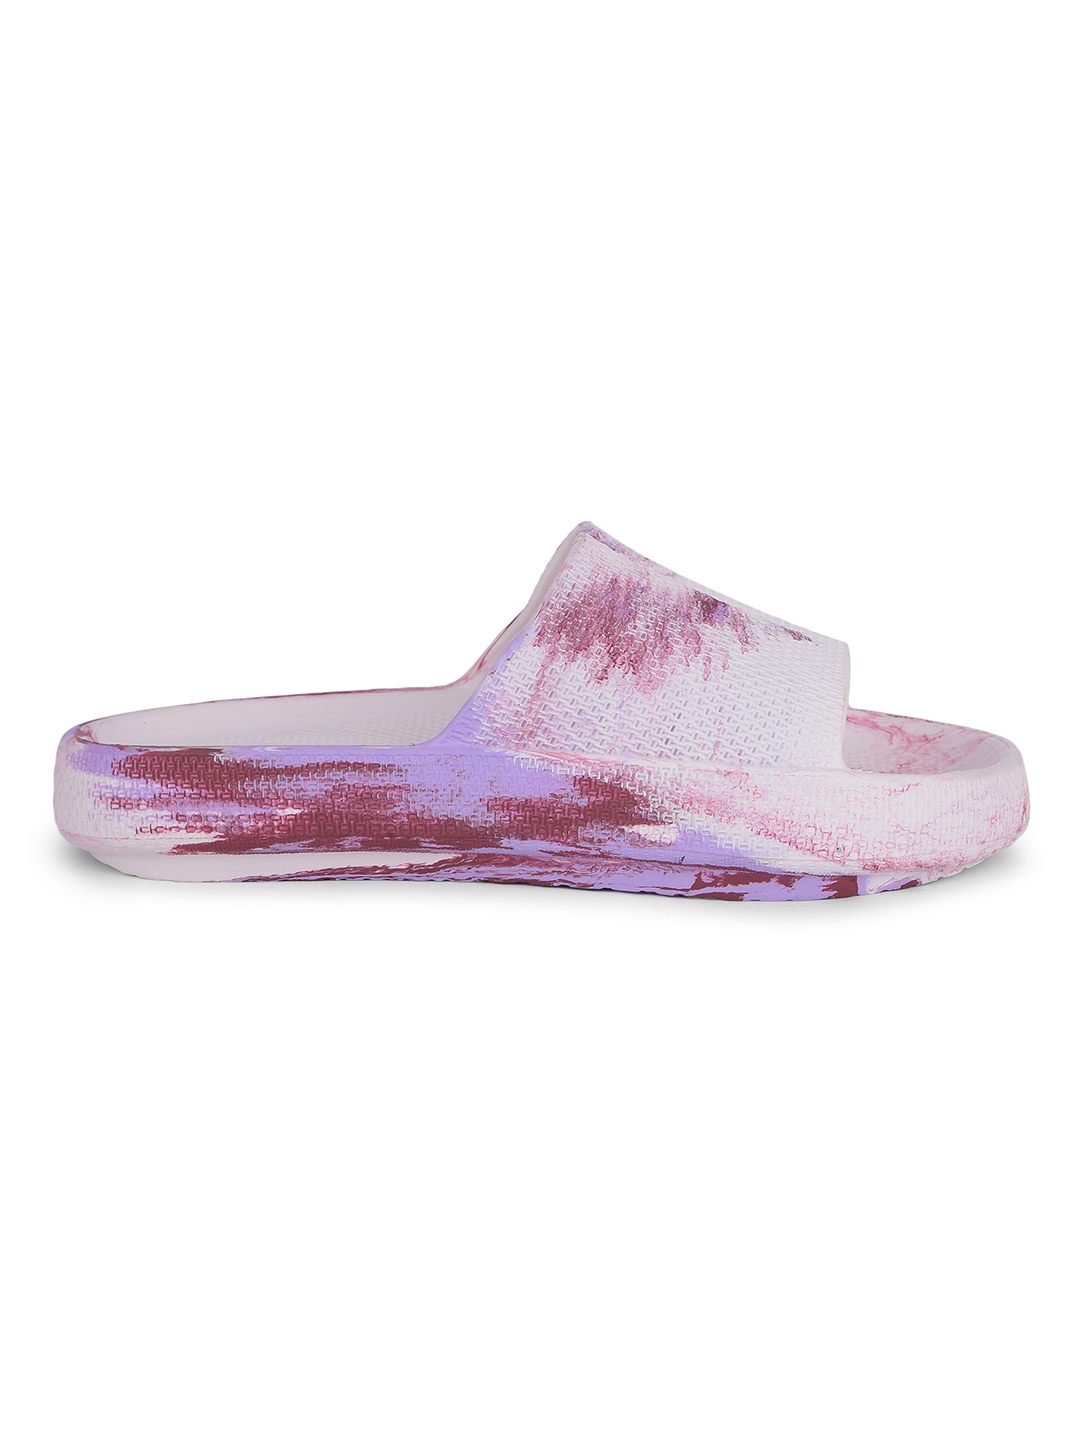 A-HA           by Liberty COMFYWALK5 Off White Flip Flops for Women